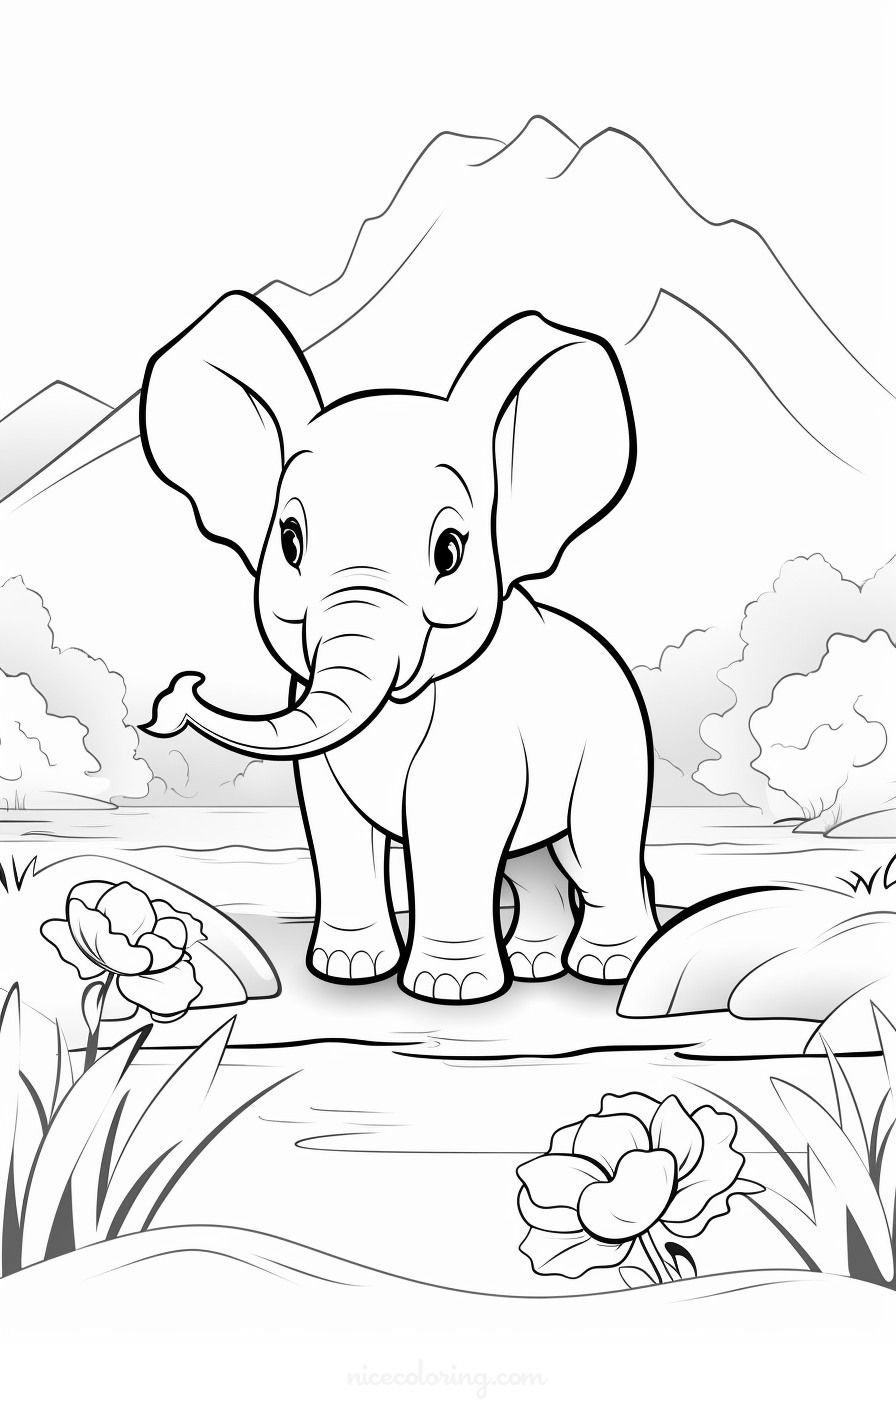 Elephant family playing coloring page